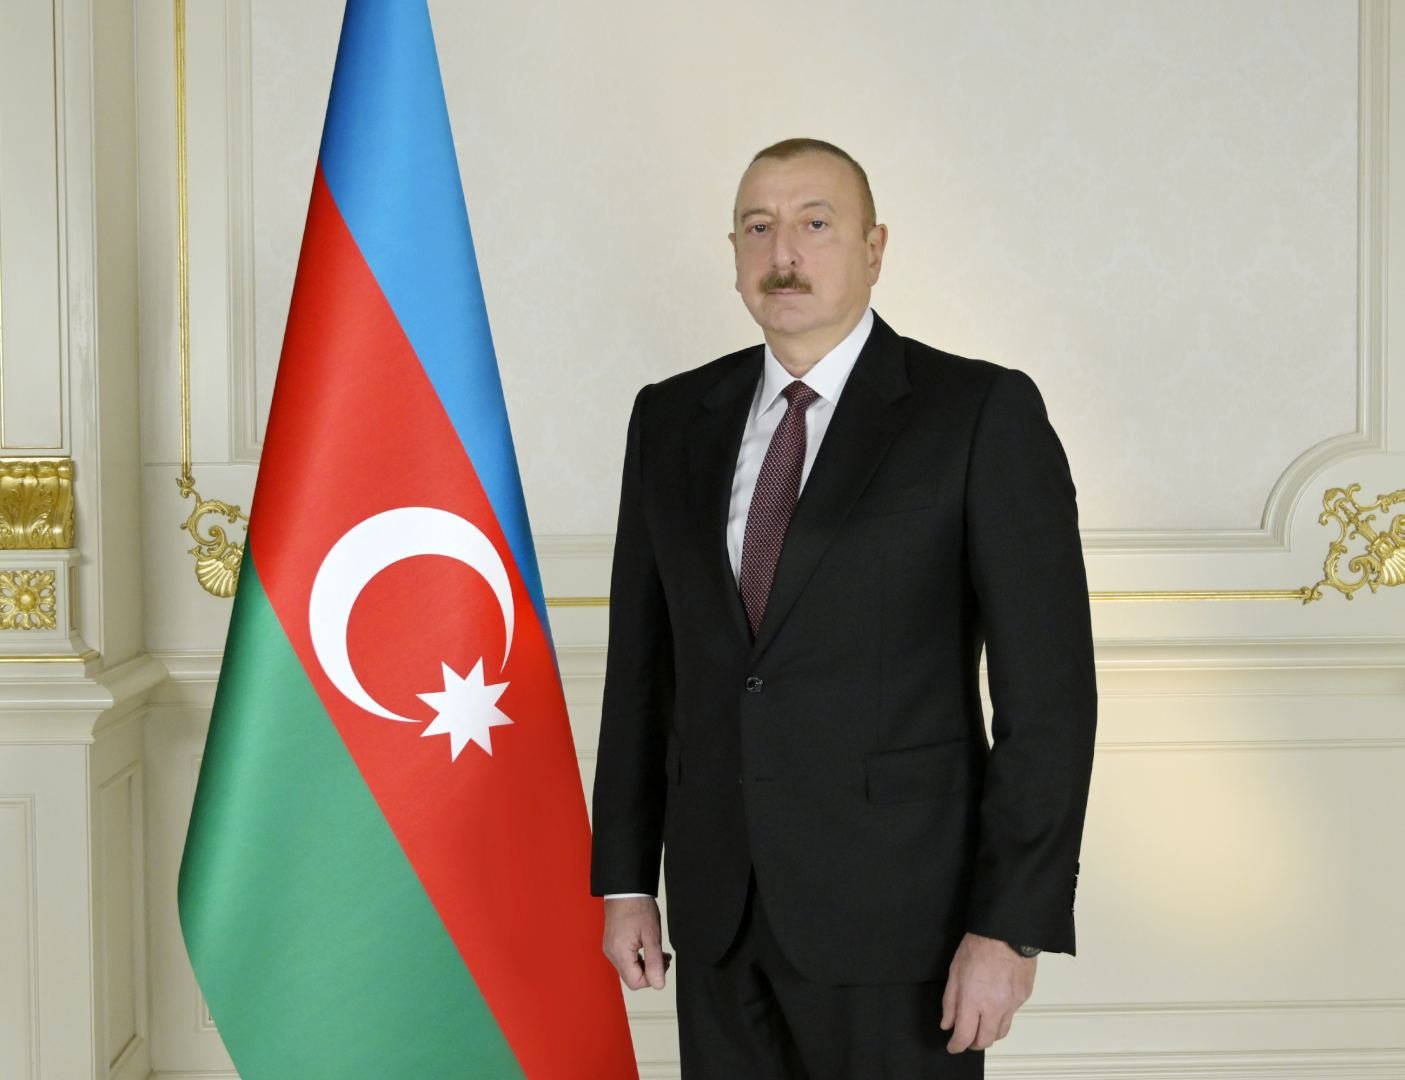 President Ilham Aliyev offered condolences to the families, loved ones of martyred military servicemen, and all people of Azerbaijan